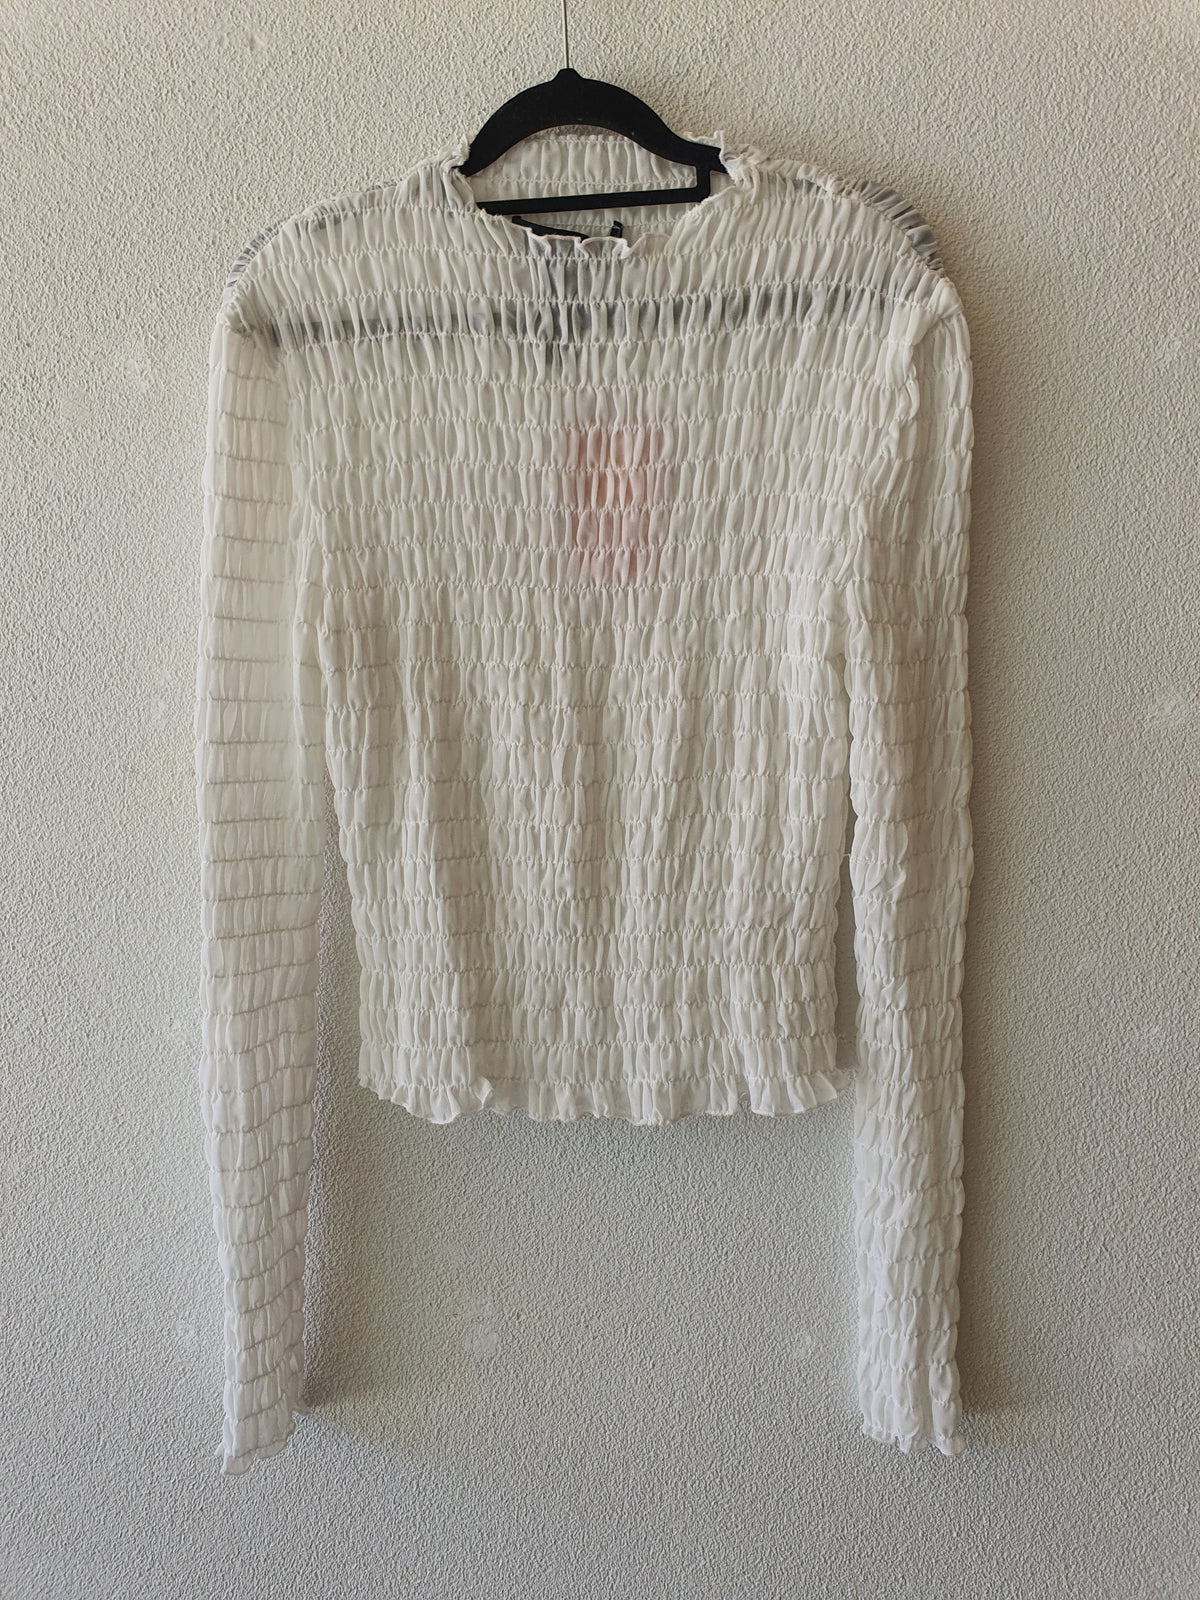 Lioness White ruffled l/s top Top XL